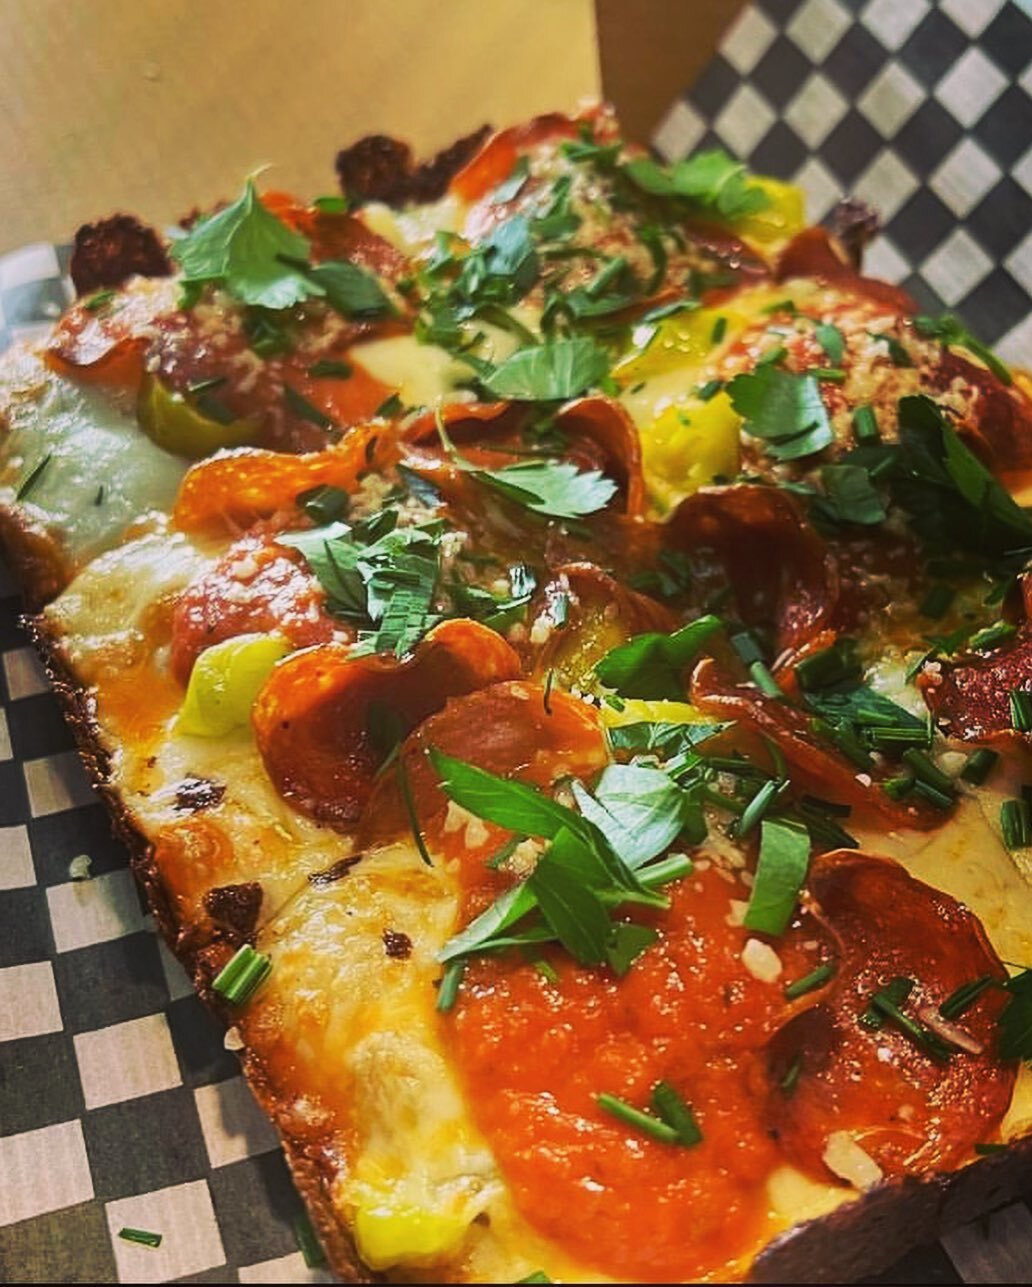 Have you checked out the delicious offerings @porchlightelora? Pizza and cocktails for Eloralicious? Yes please!